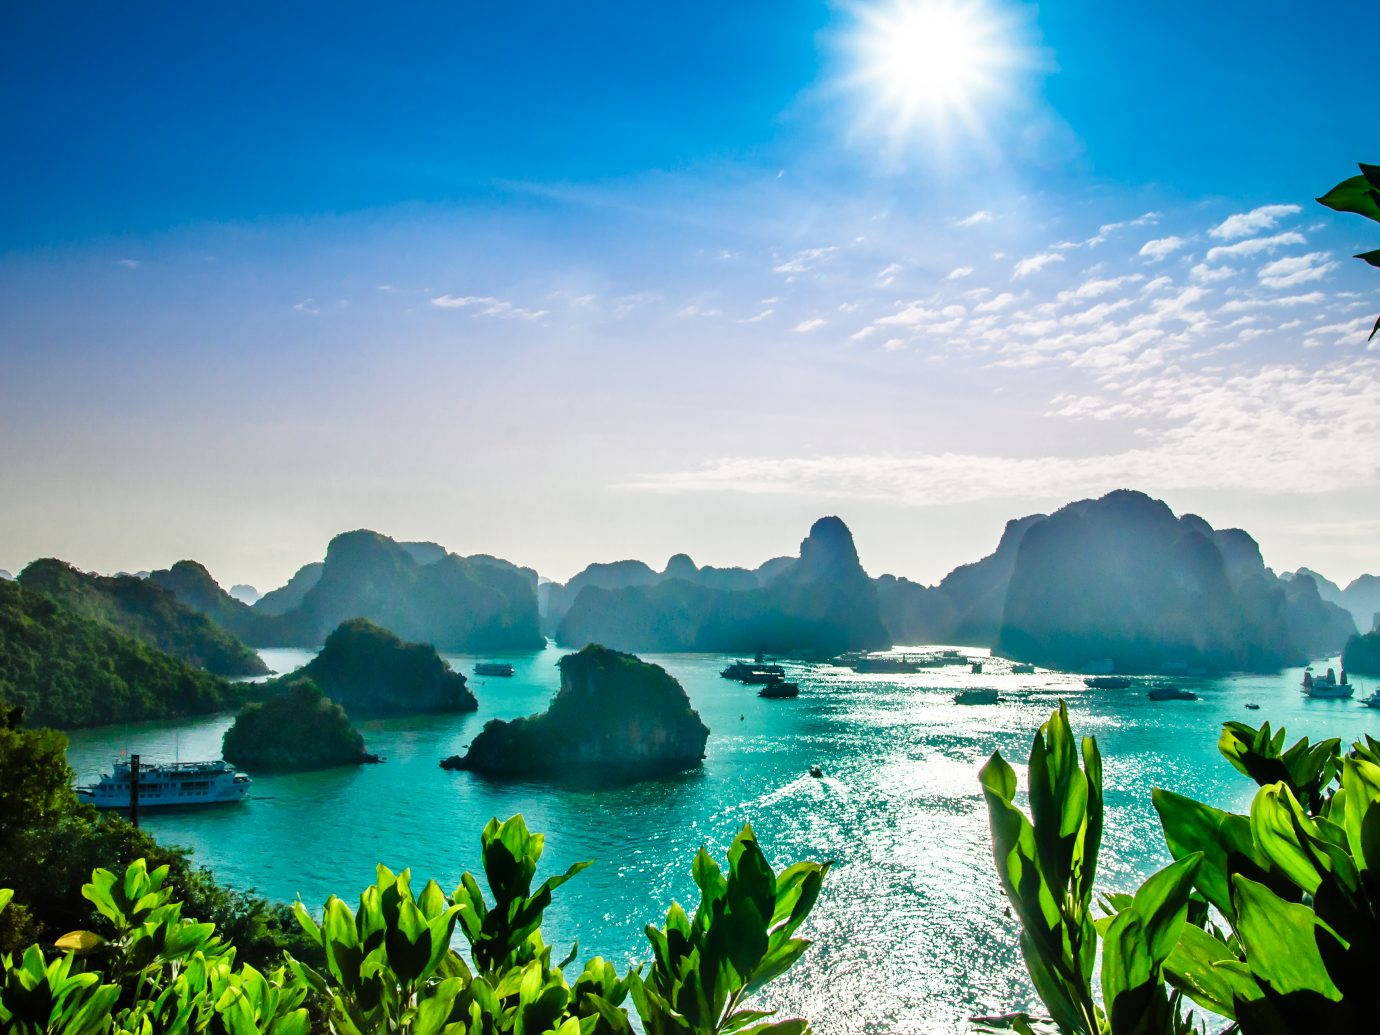 View on karst landscape by halong bay in Vietnam